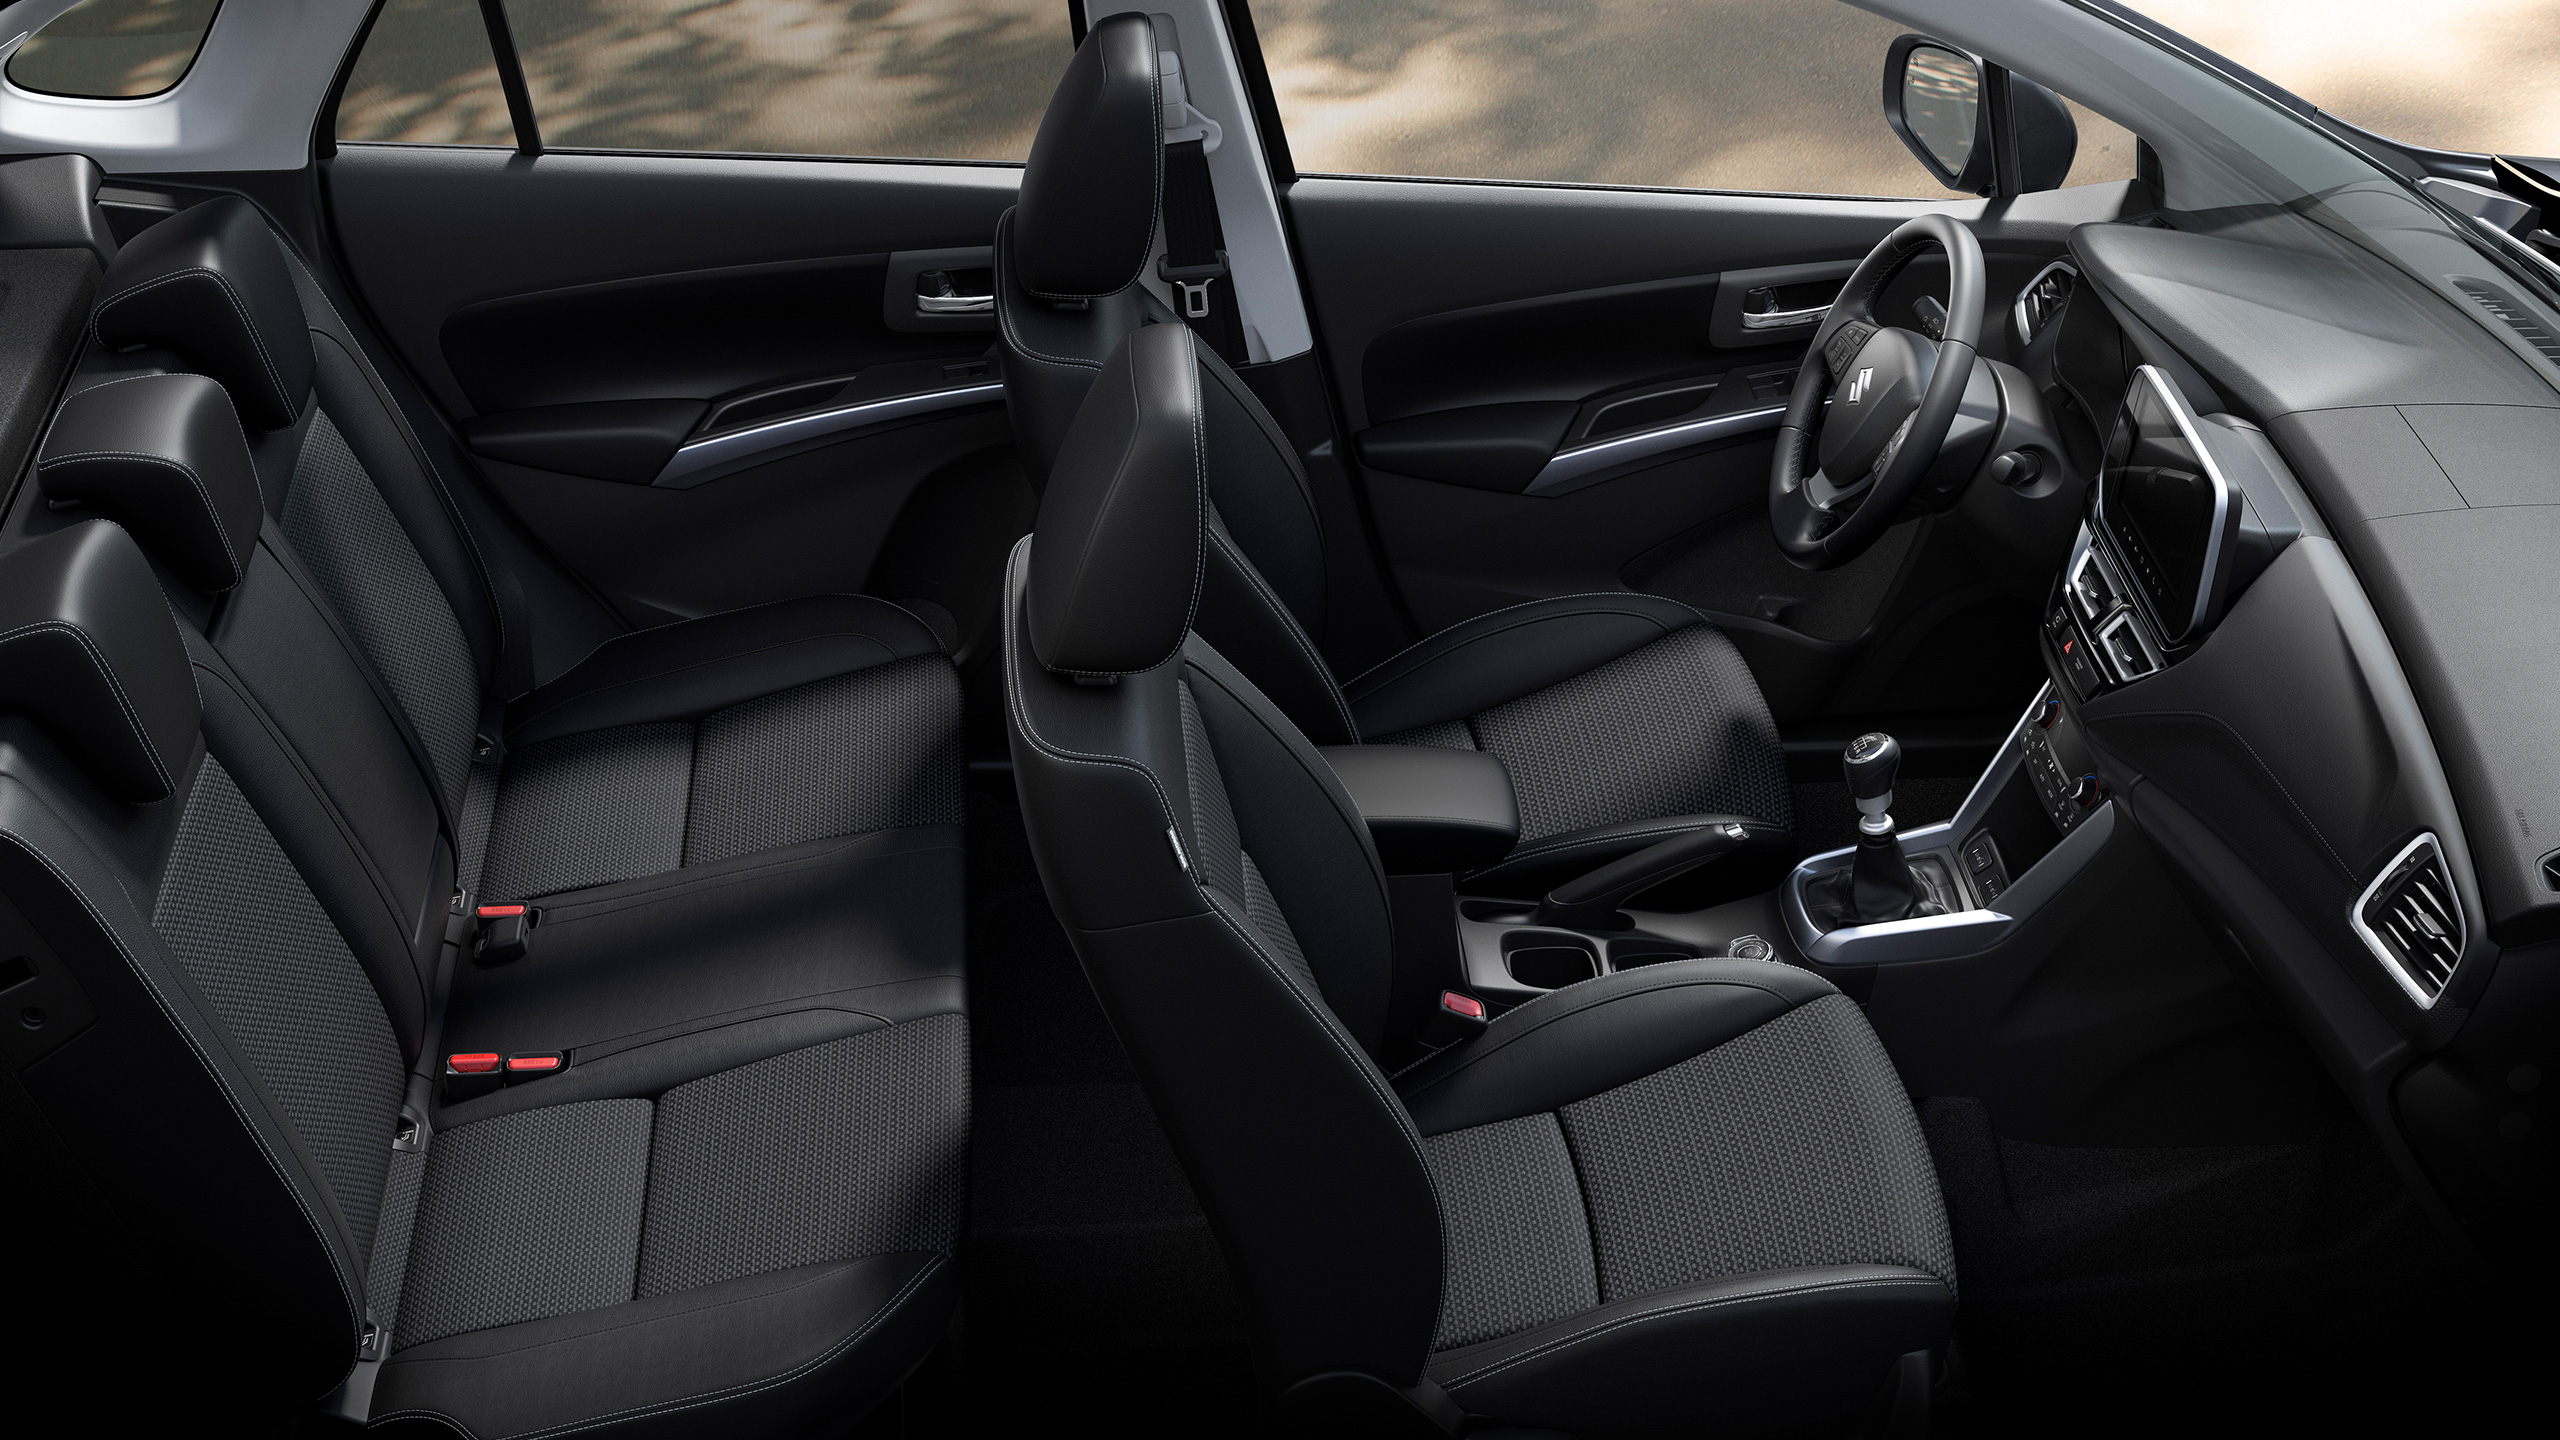 image_from_world_premiere_of_the_all-new_S-CROSS_interior_side